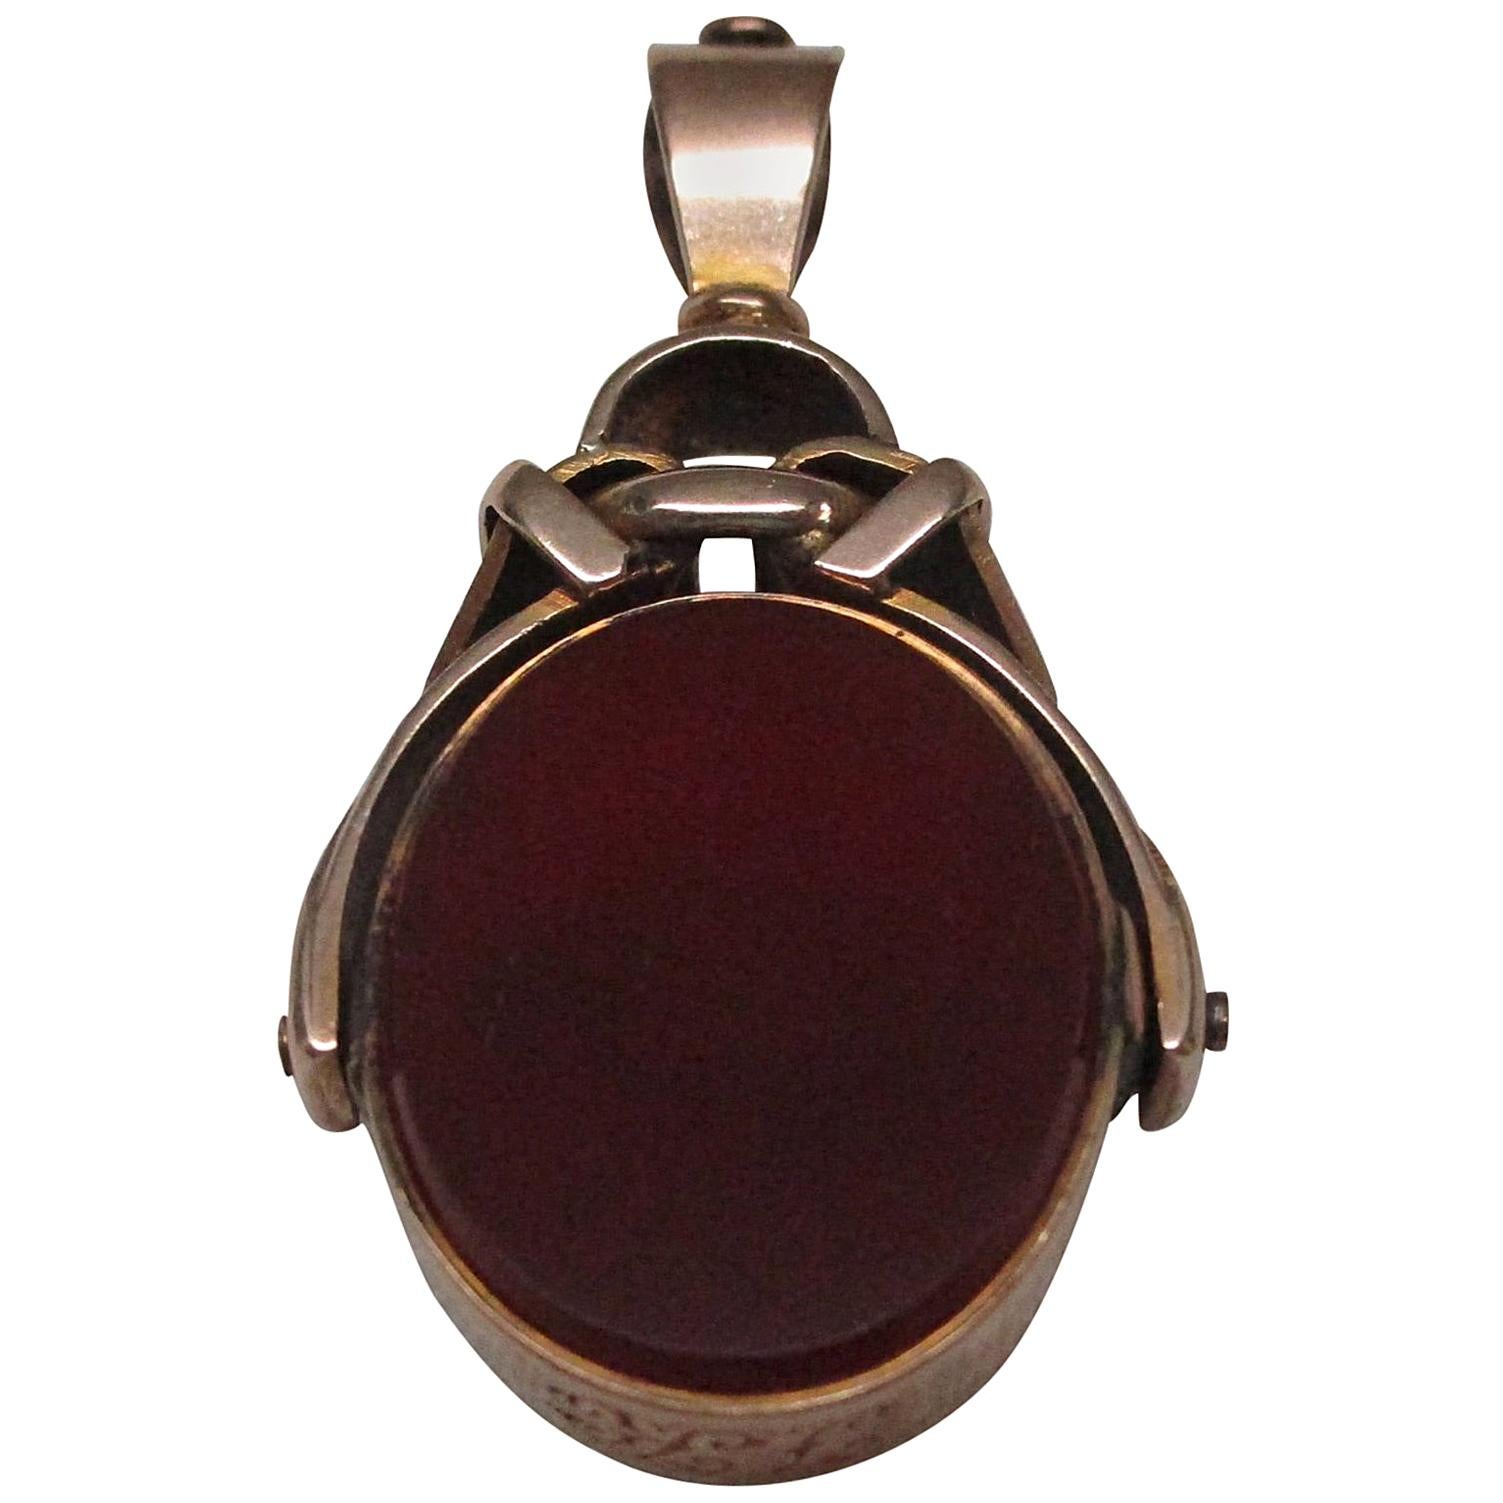 The deep, rich cranberry color of this fob pendant has a matte-like finish, which creates a luxurious sense of elegance that is a defining feature of the Victorian era. With a color as smooth as a fine red wine, this fob reminds one of warm, family